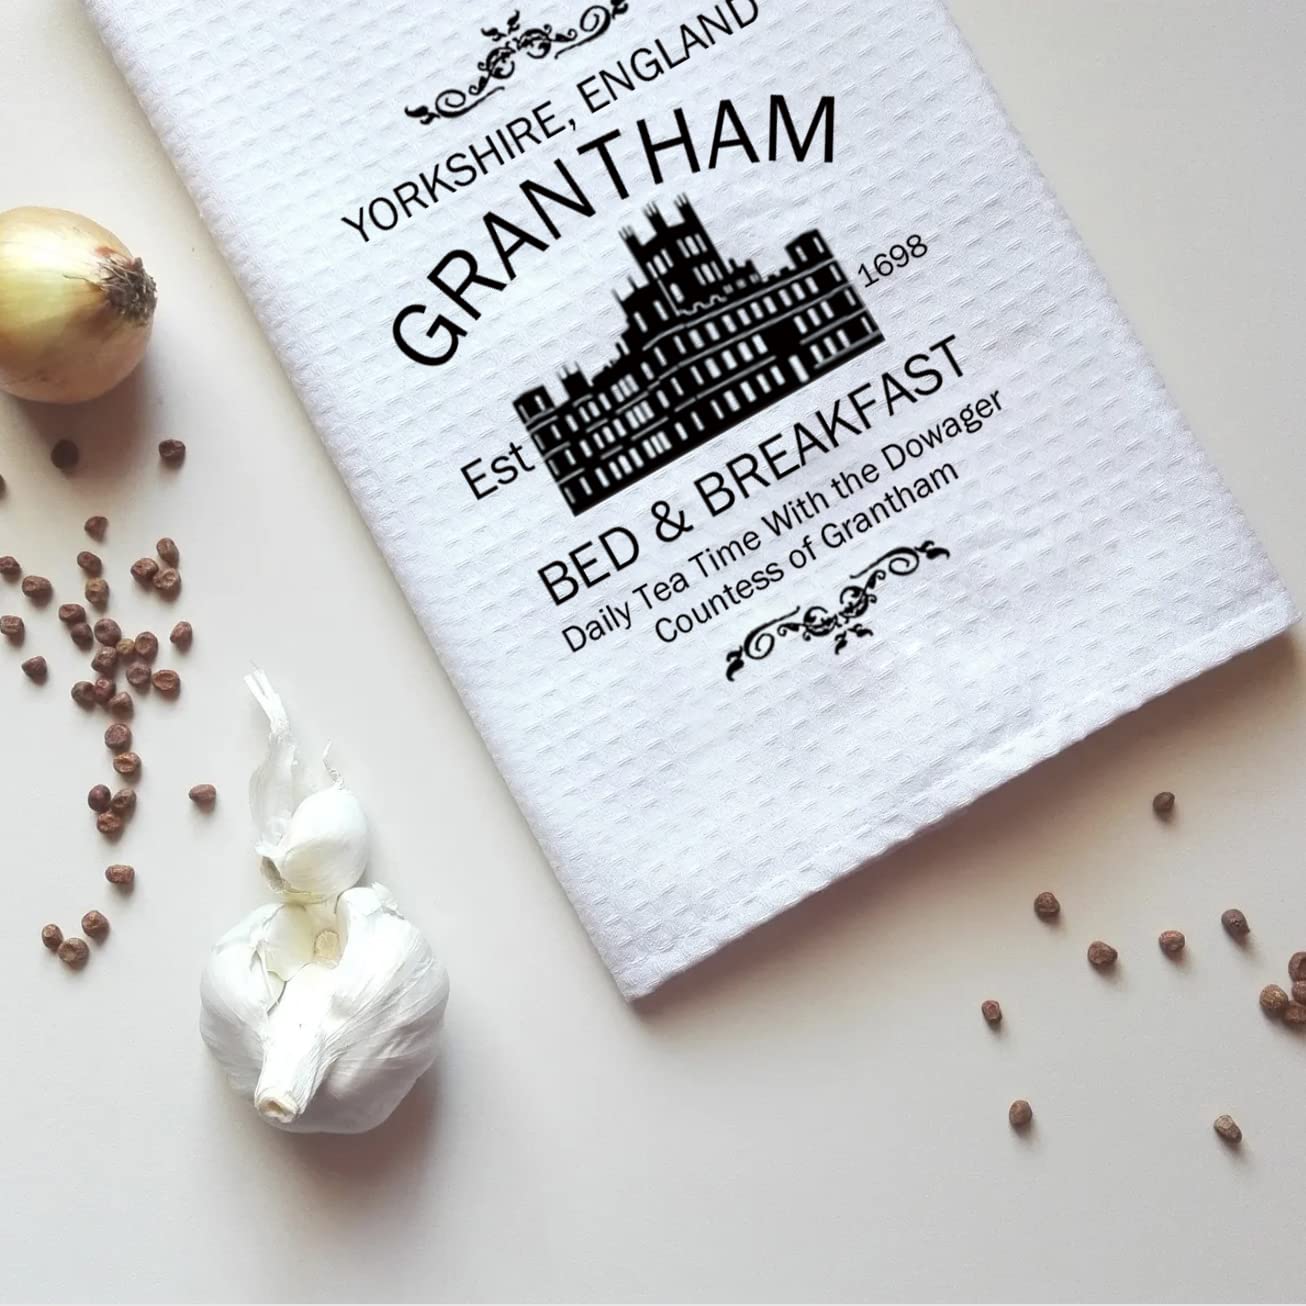 Grantham Spill The Tea Dowager Countess of Grantham Lady Violet Tea House Kitchen Towel Dish Towel Tea Towel (Grantham Towel)